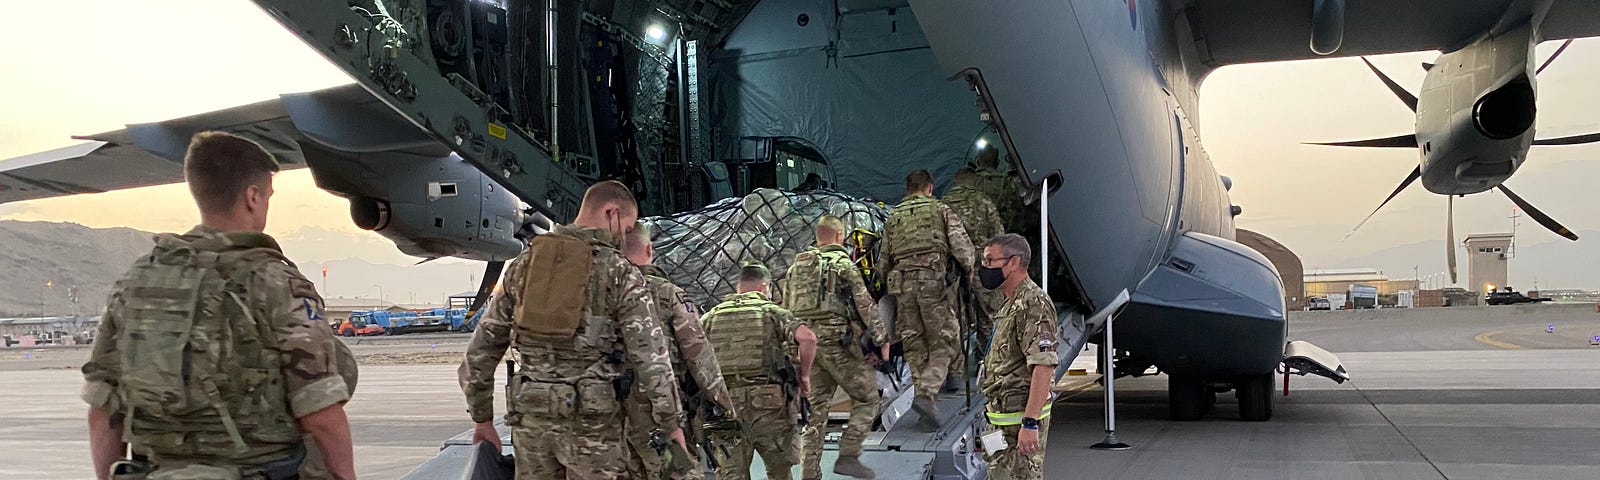 British soldiers at HKIA (Hamid Karzai International Airport) ready to be flown home back to the United Kingdom at the end of their operational tour of Afghanistan on Operation TORAL.